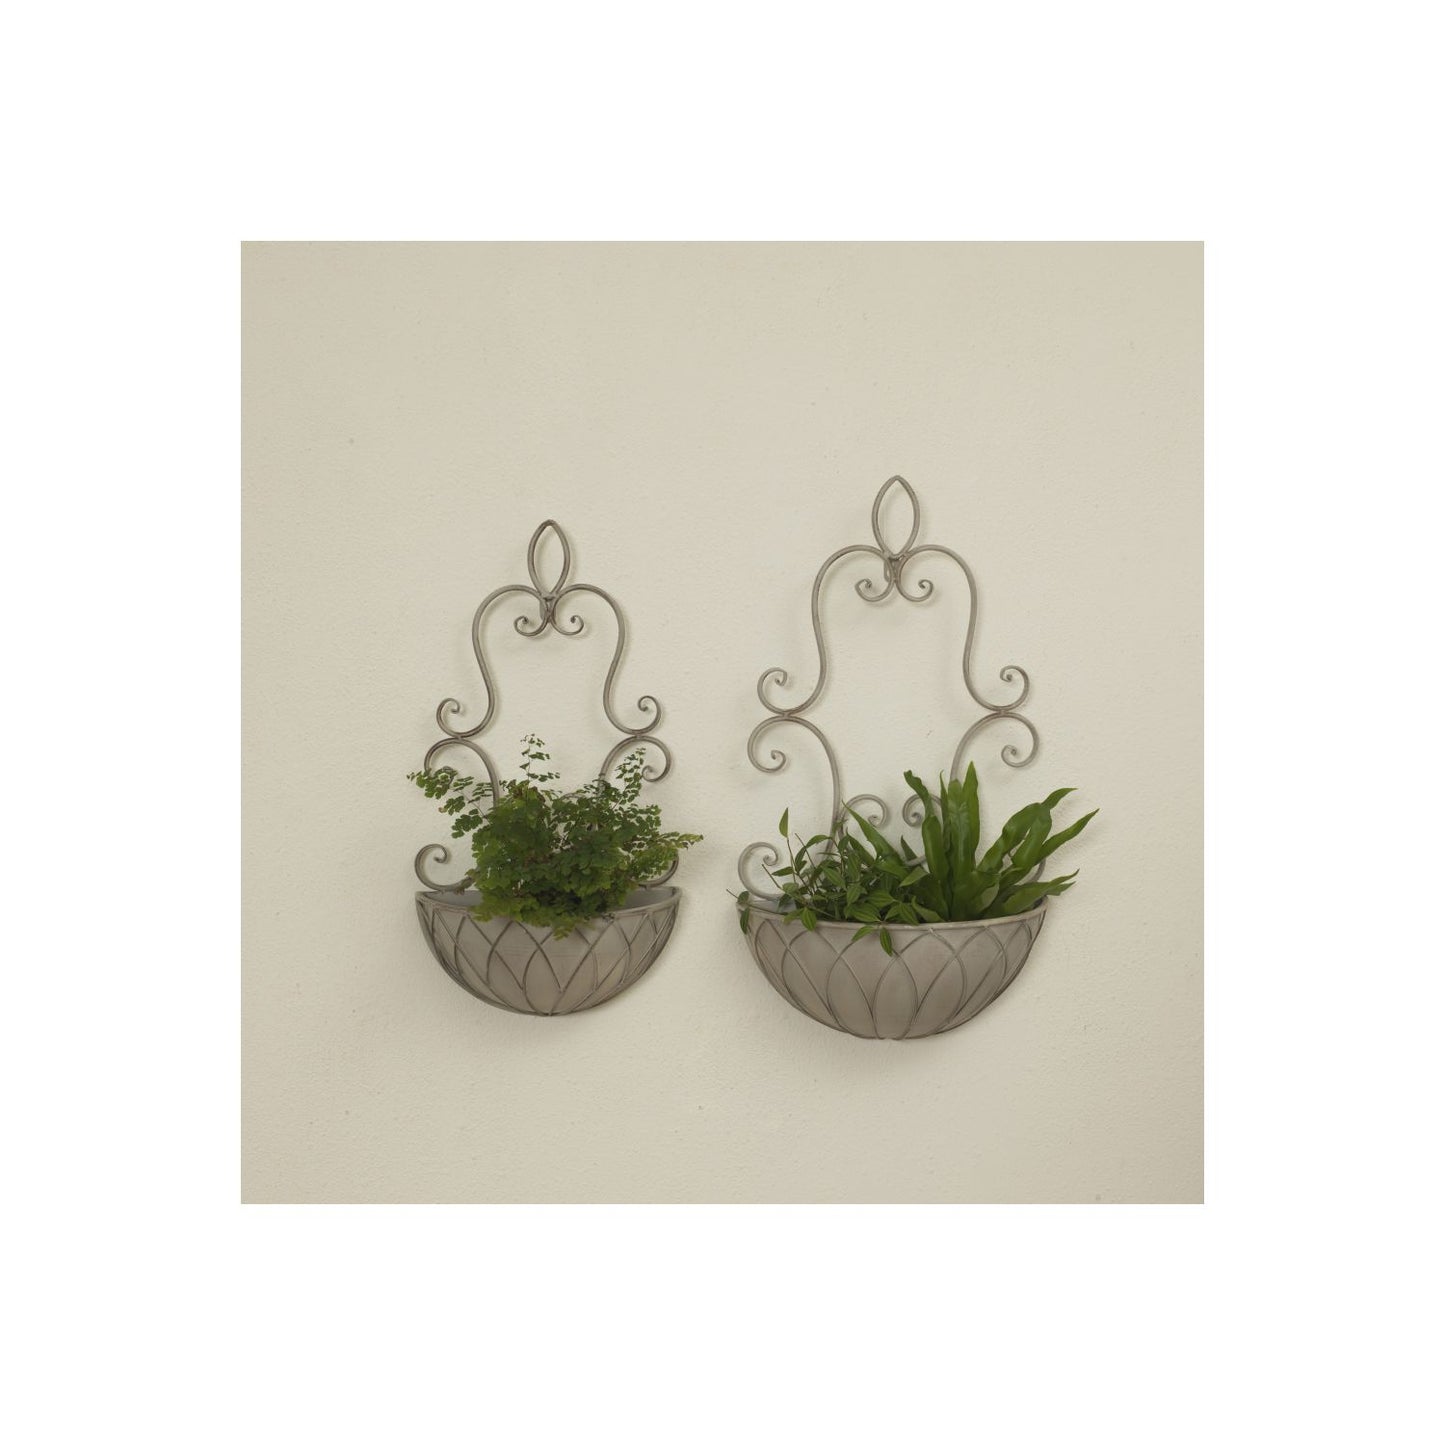 Gerson Company Set of 2 Metal Wall Hanging Plant Baskets